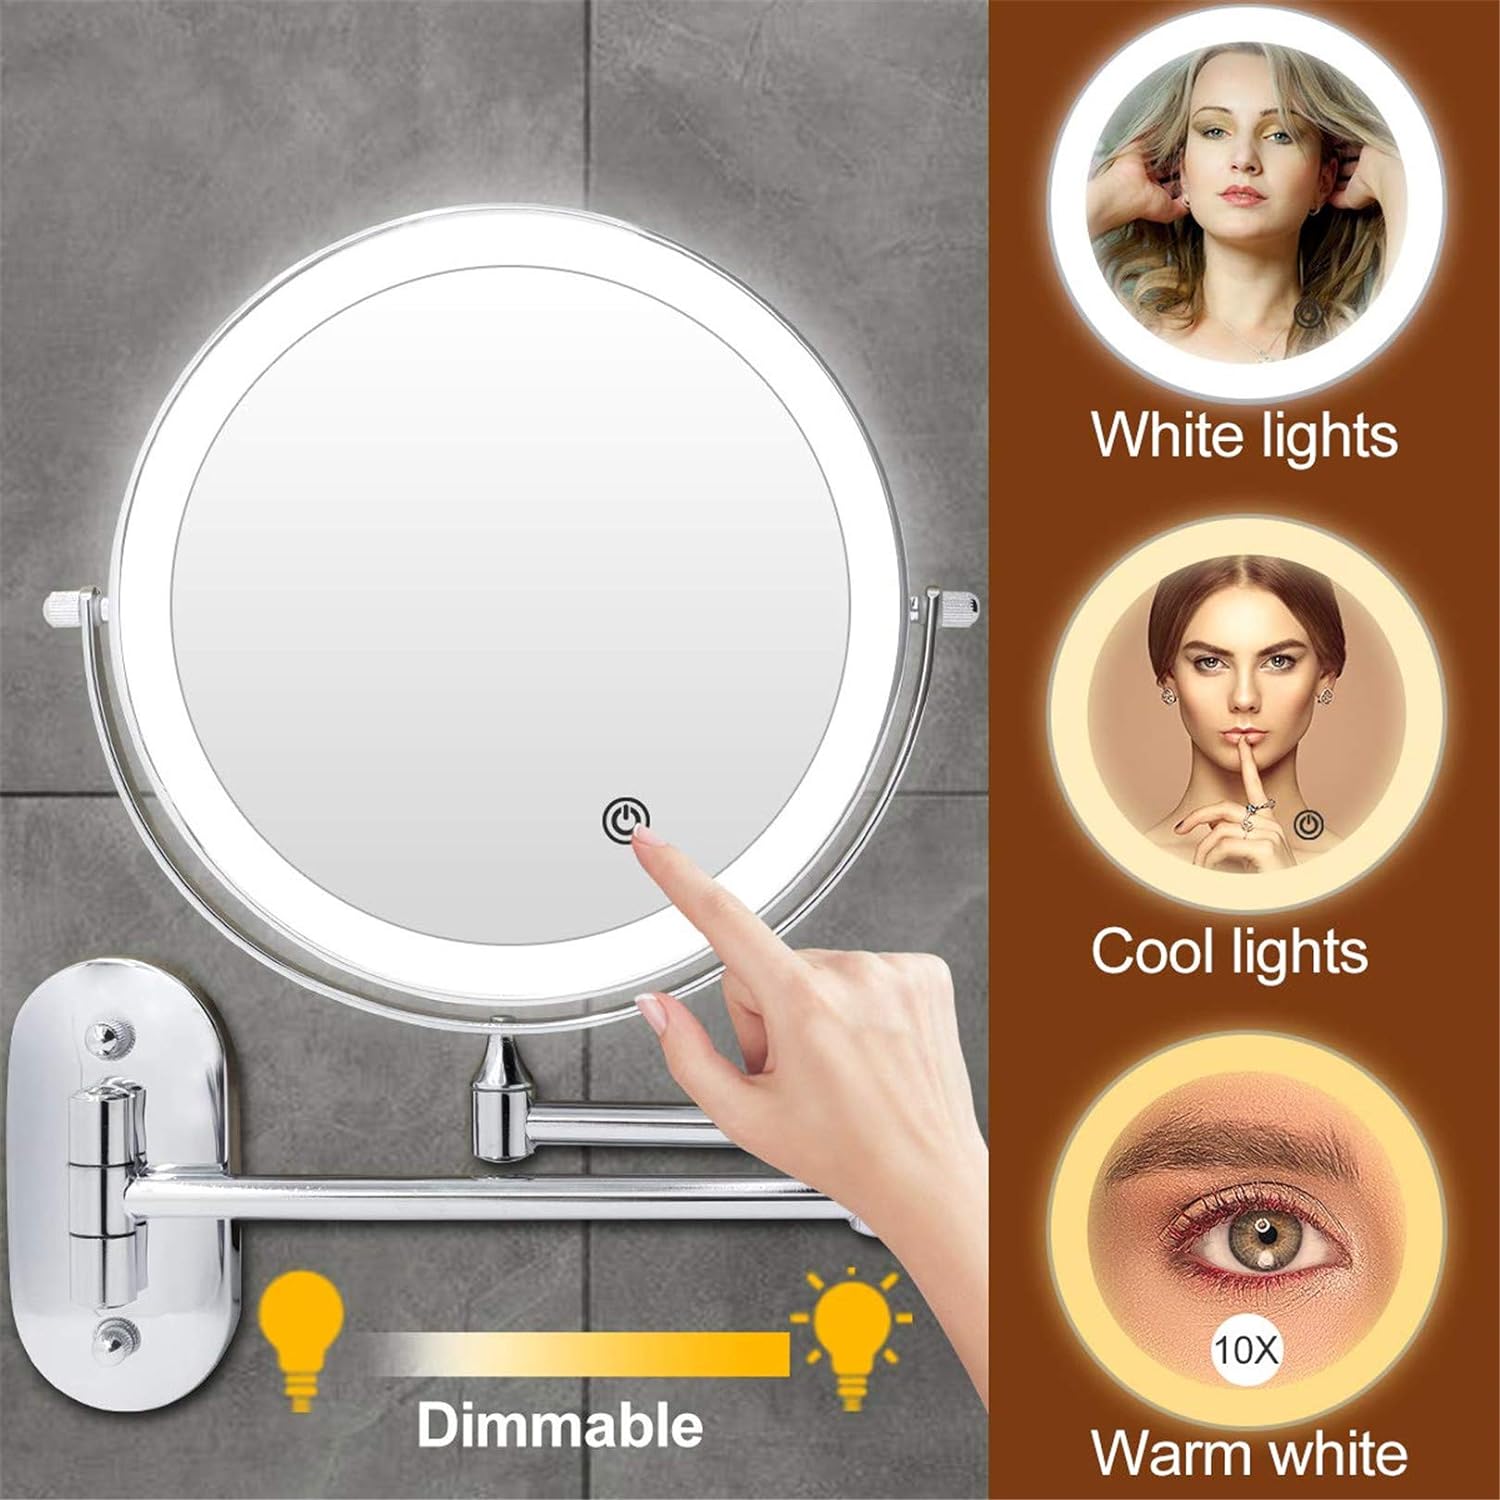 10x Magnifying Makeup Mirror, Wall Mounted Magnifying Vanity Mirror With Lights